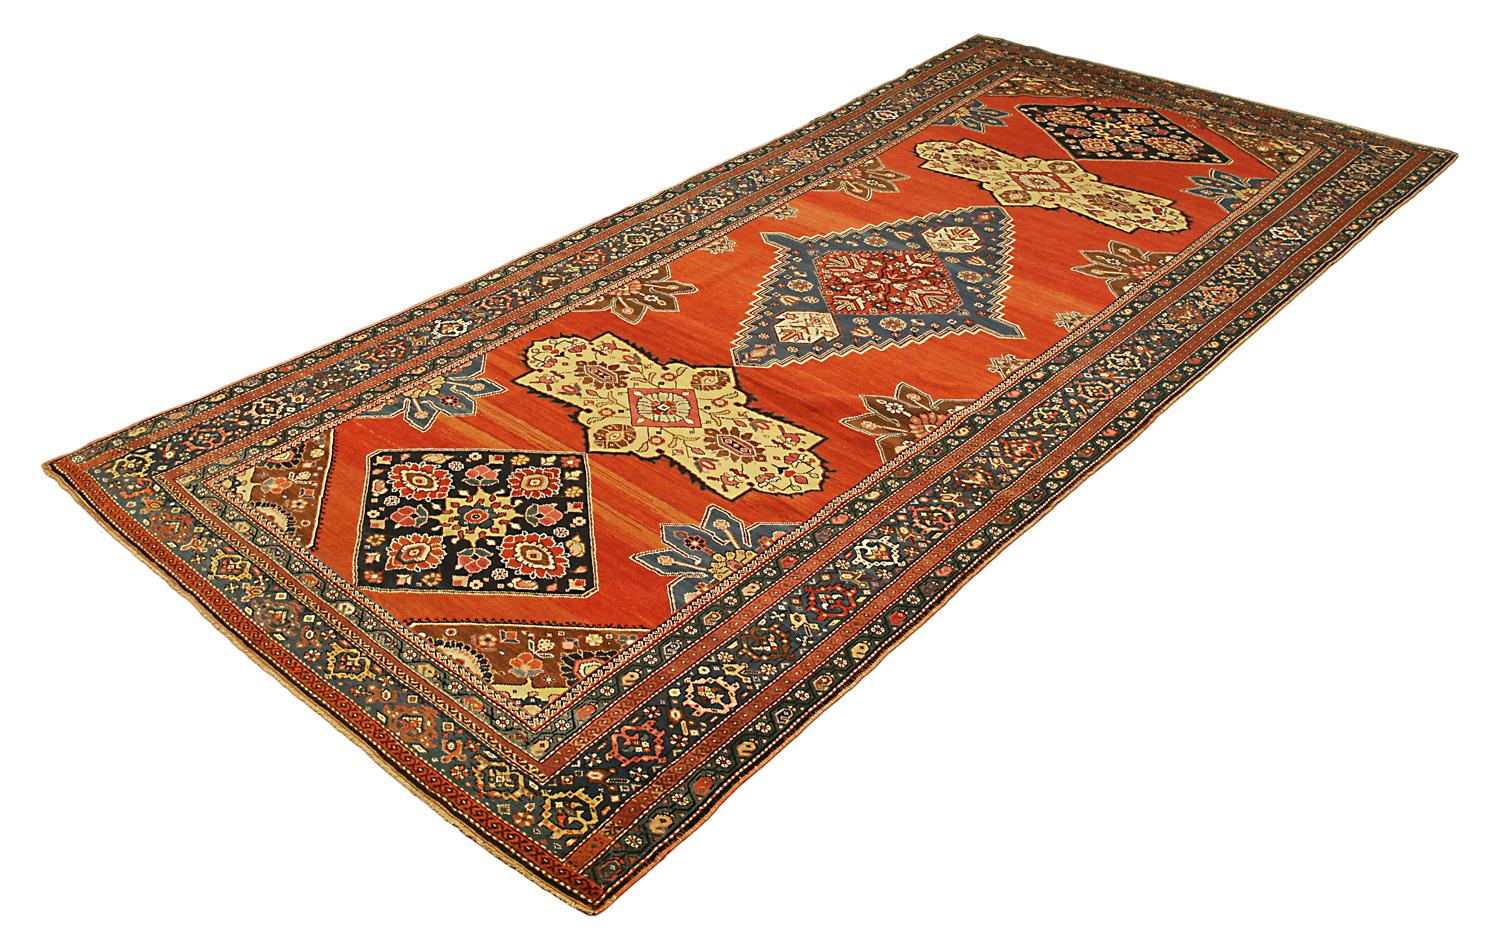 Karabag antique rugs have the oldest and most diverse patterns among Caucasian rugs. The beauty and uniqueness of these carpets is due to the cultural fusion and old traditions that have strongly influenced the design and pattern of these carpets.